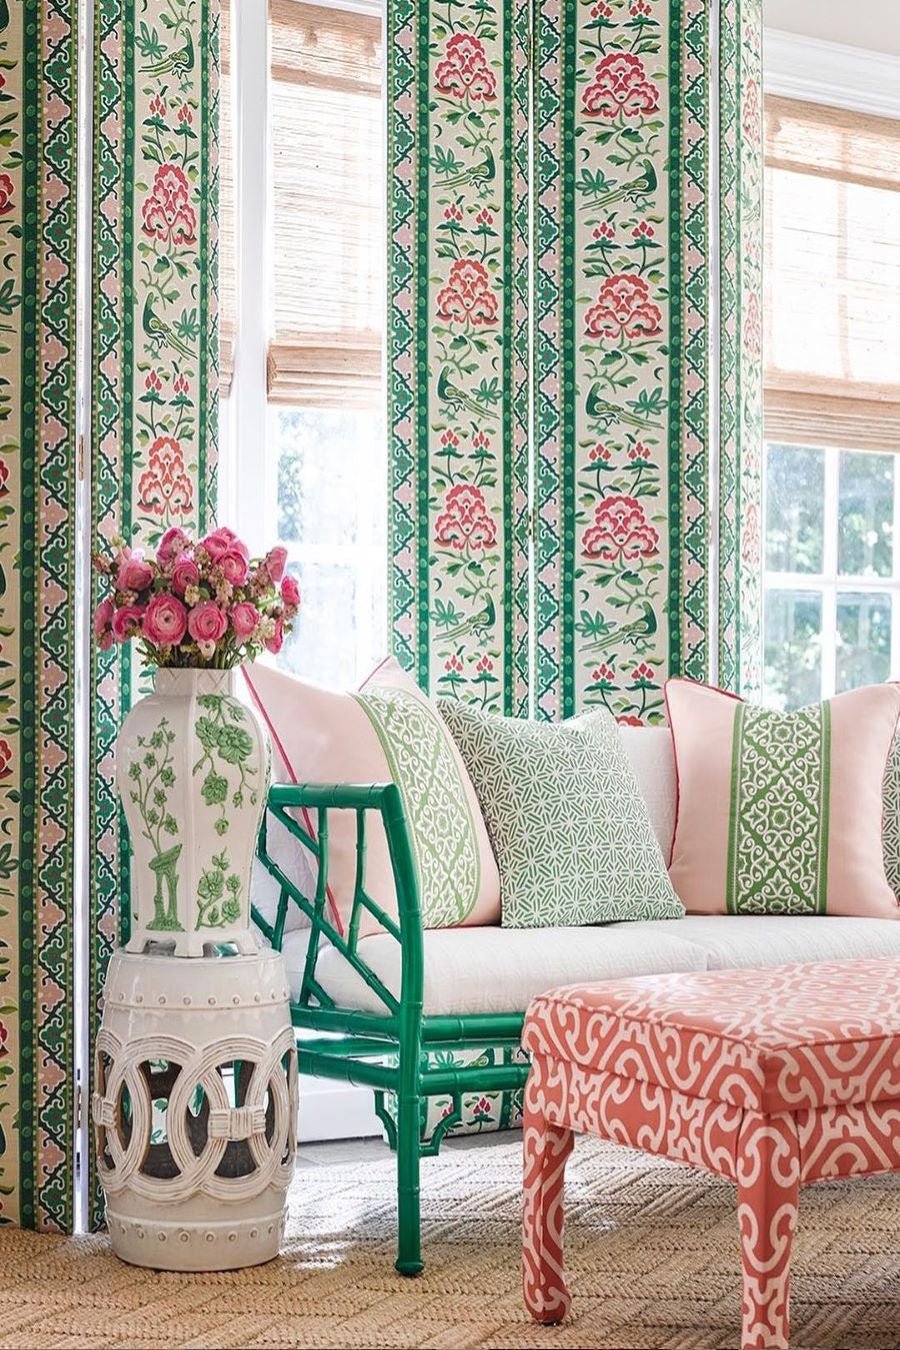 Chinoiserie fabrics and wallcovering | Inside Stores 